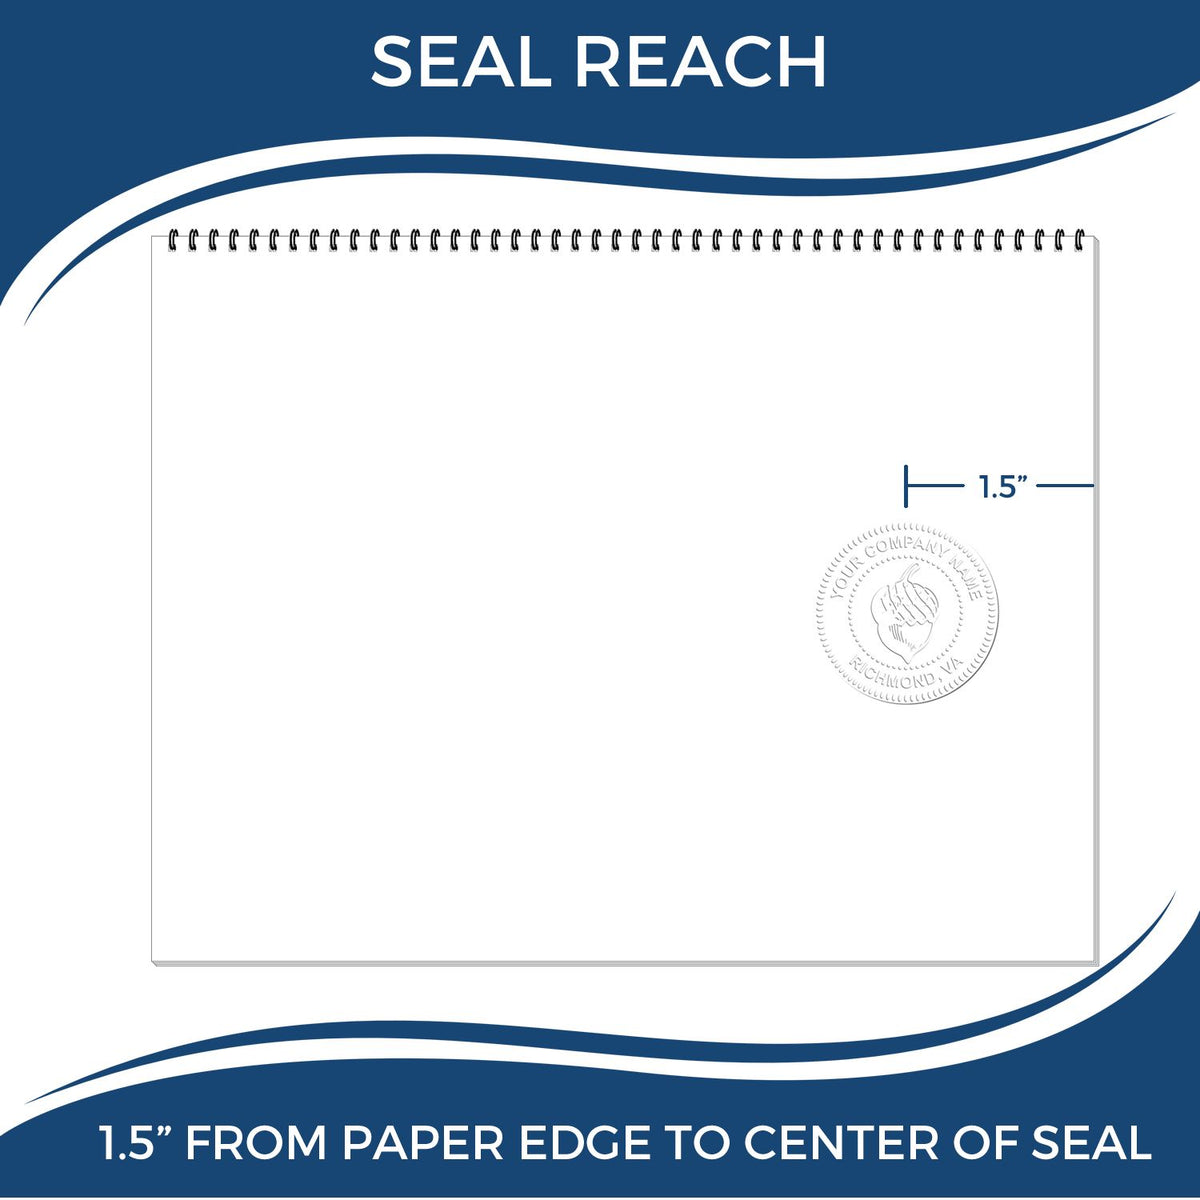 An infographic showing the seal reach which is represented by a ruler and a miniature seal image of the Handheld Arizona Professional Engineer Embosser